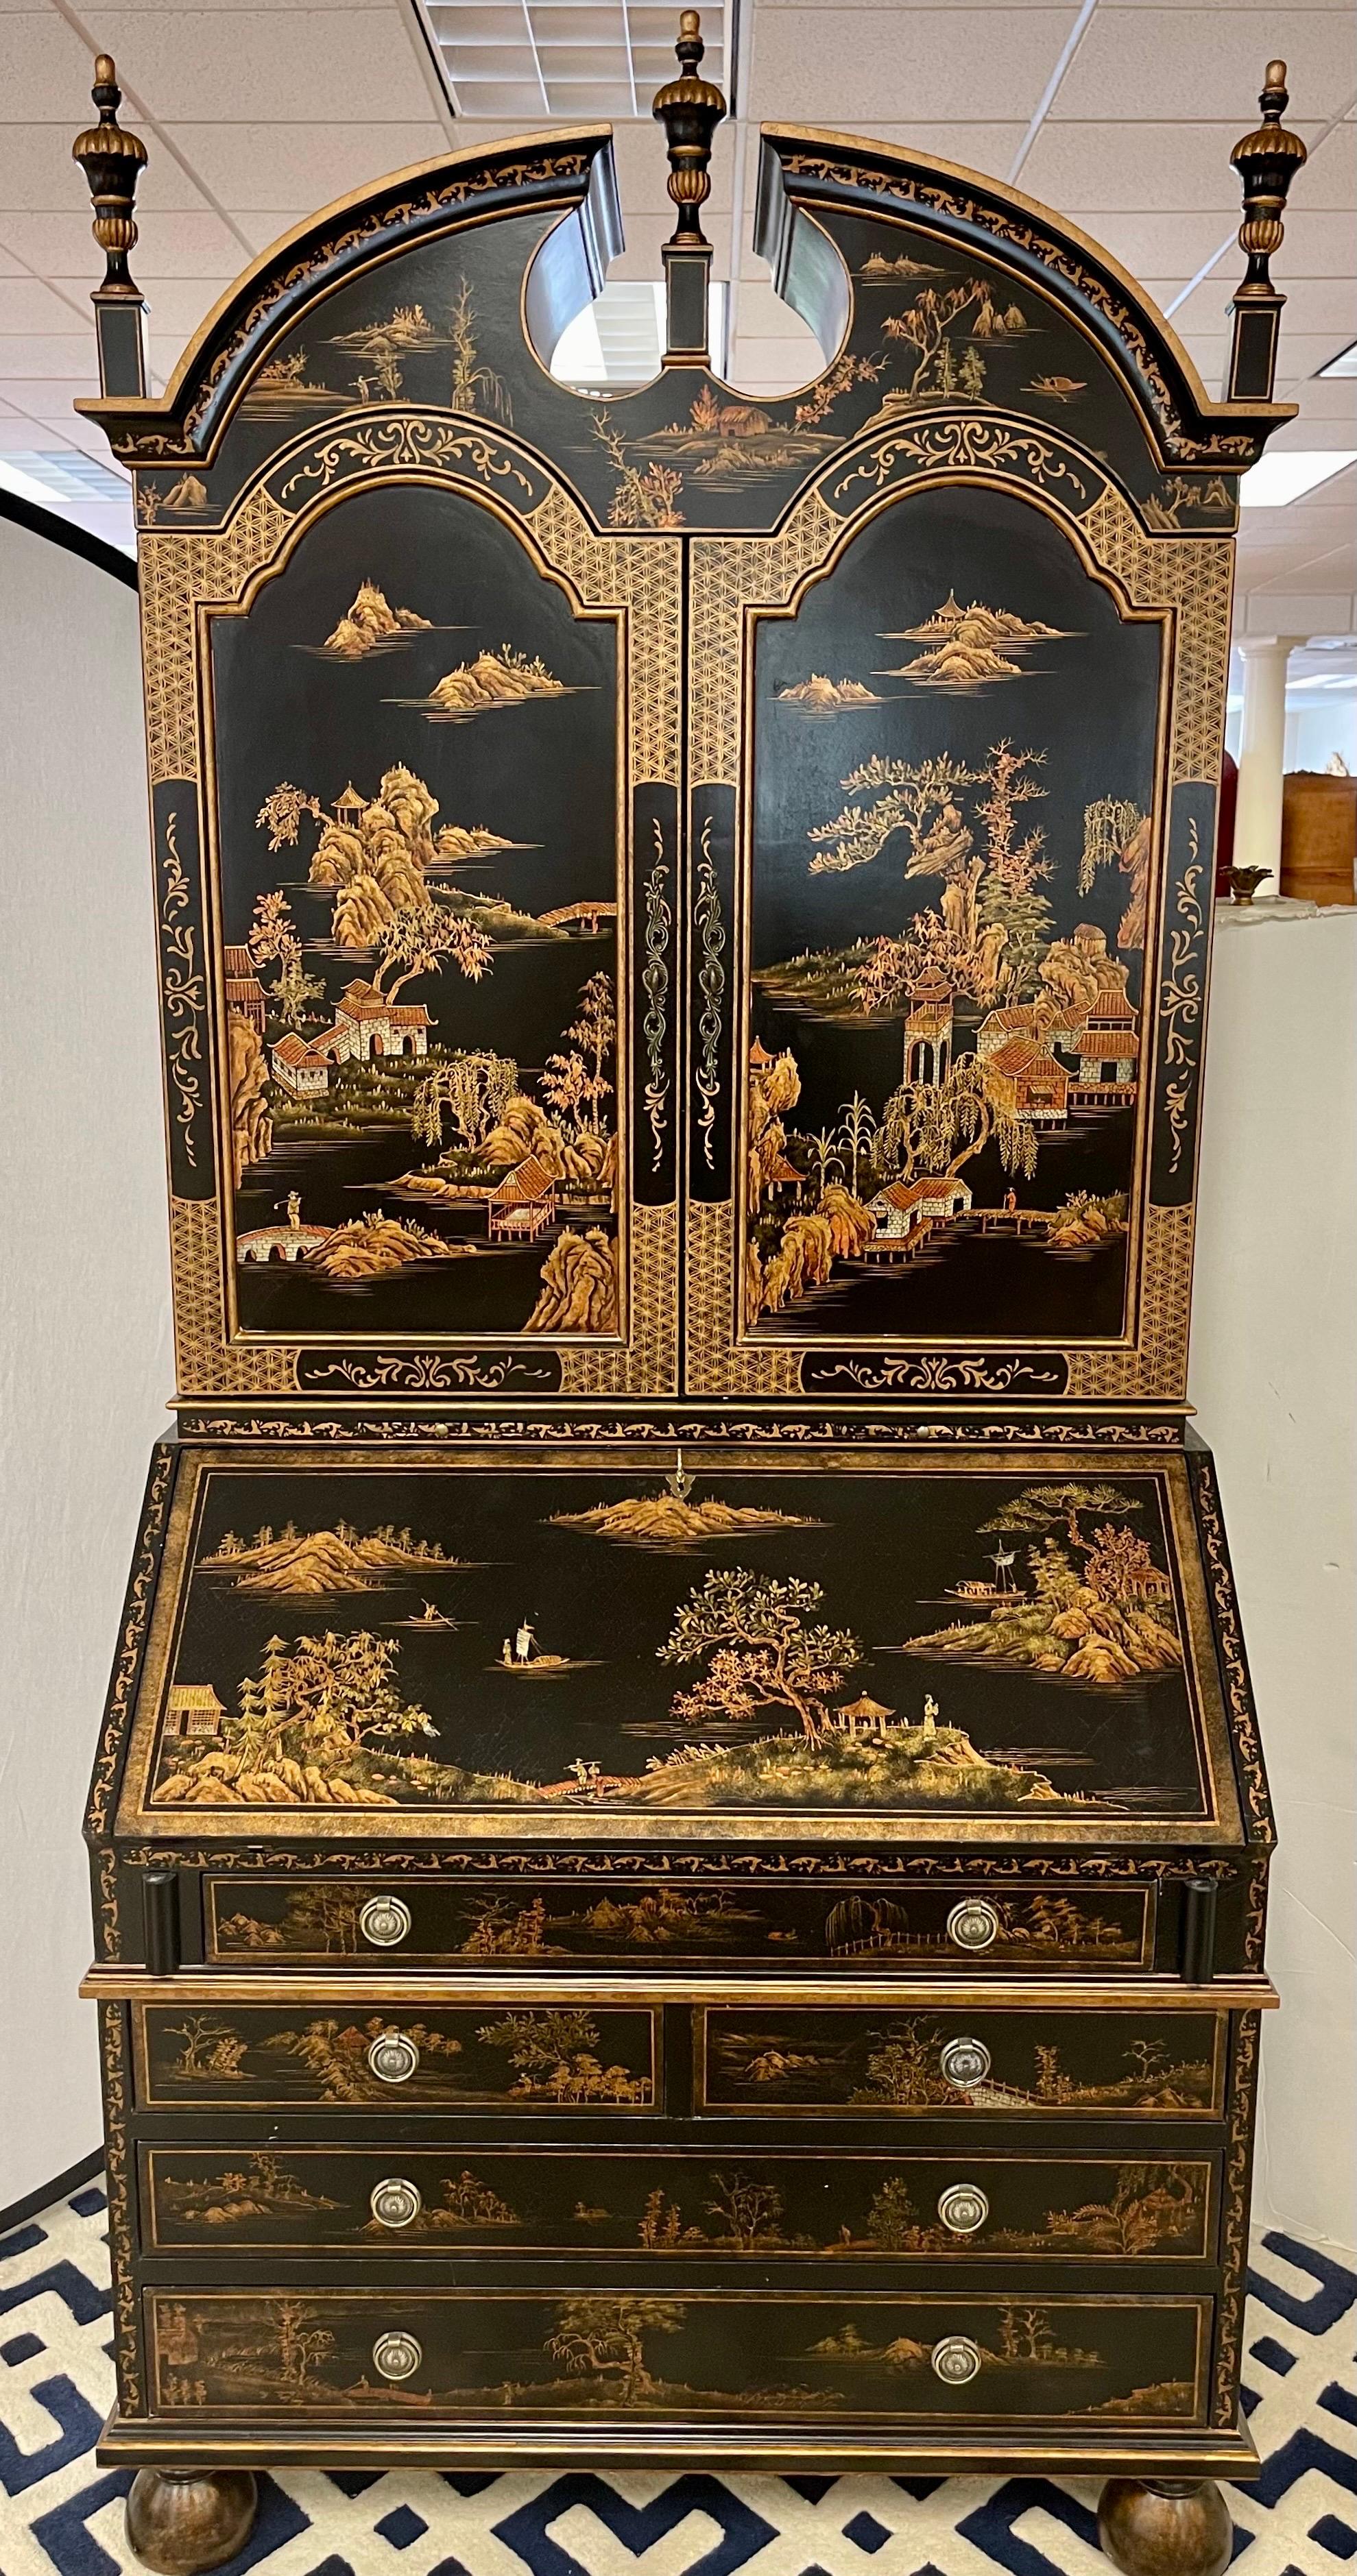 Magnificent Chinoiserie decorated black secretary desk with exquisite hand painted landscape scenery on front and sides. Features 2 pcs with top portion opening to shelves. Bottom has drop leaf desk opening to writing surface with cubbies and